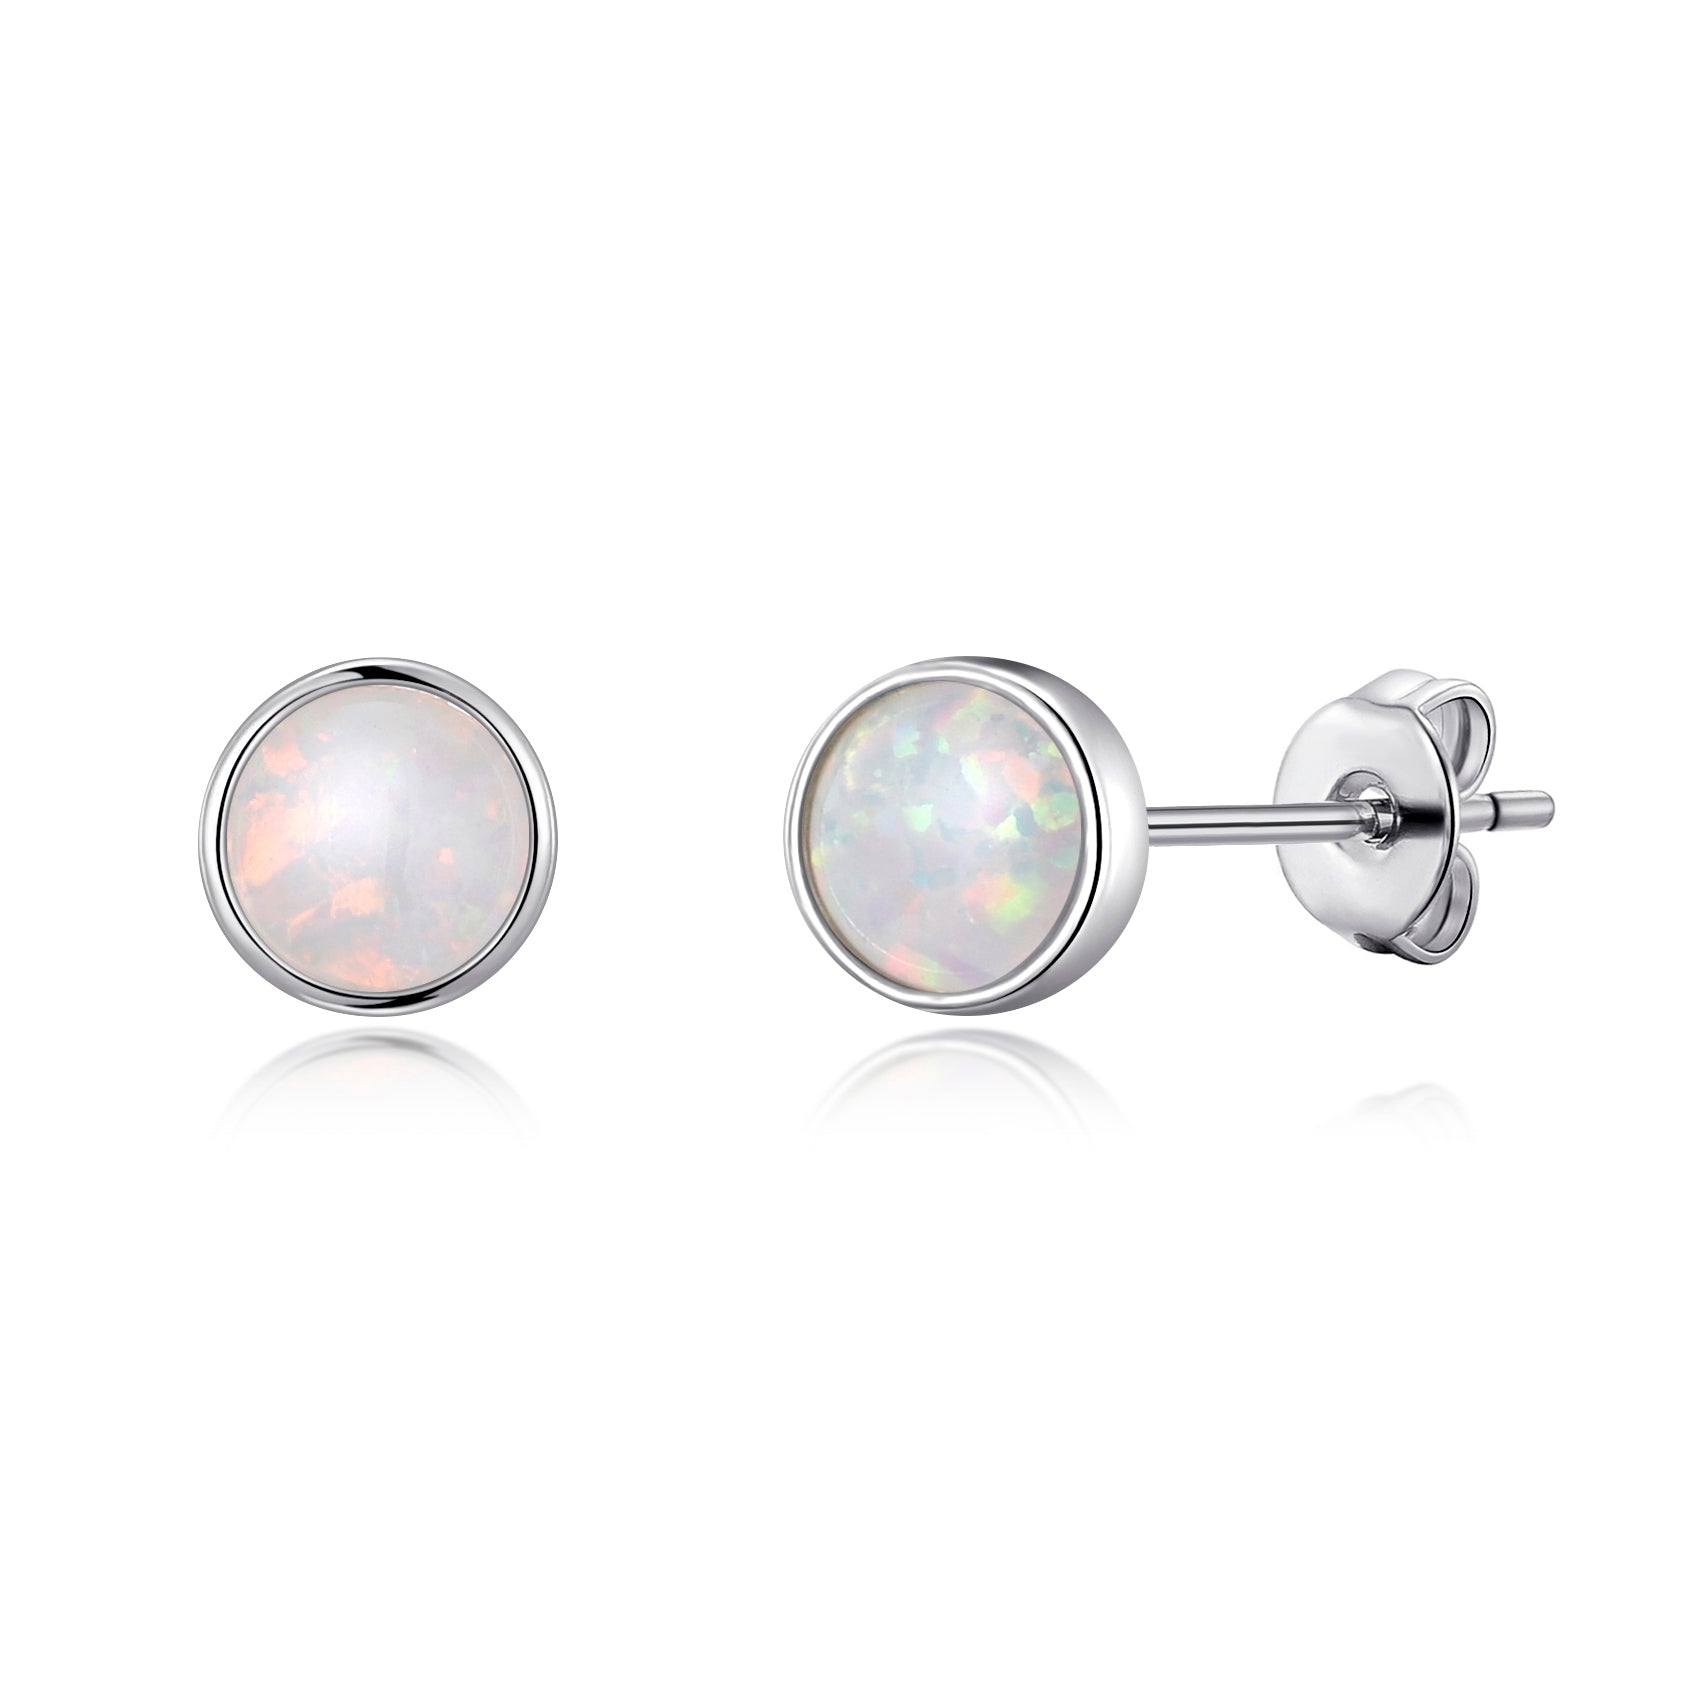 Synthetic White Opal Stud Earrings with Quote Card